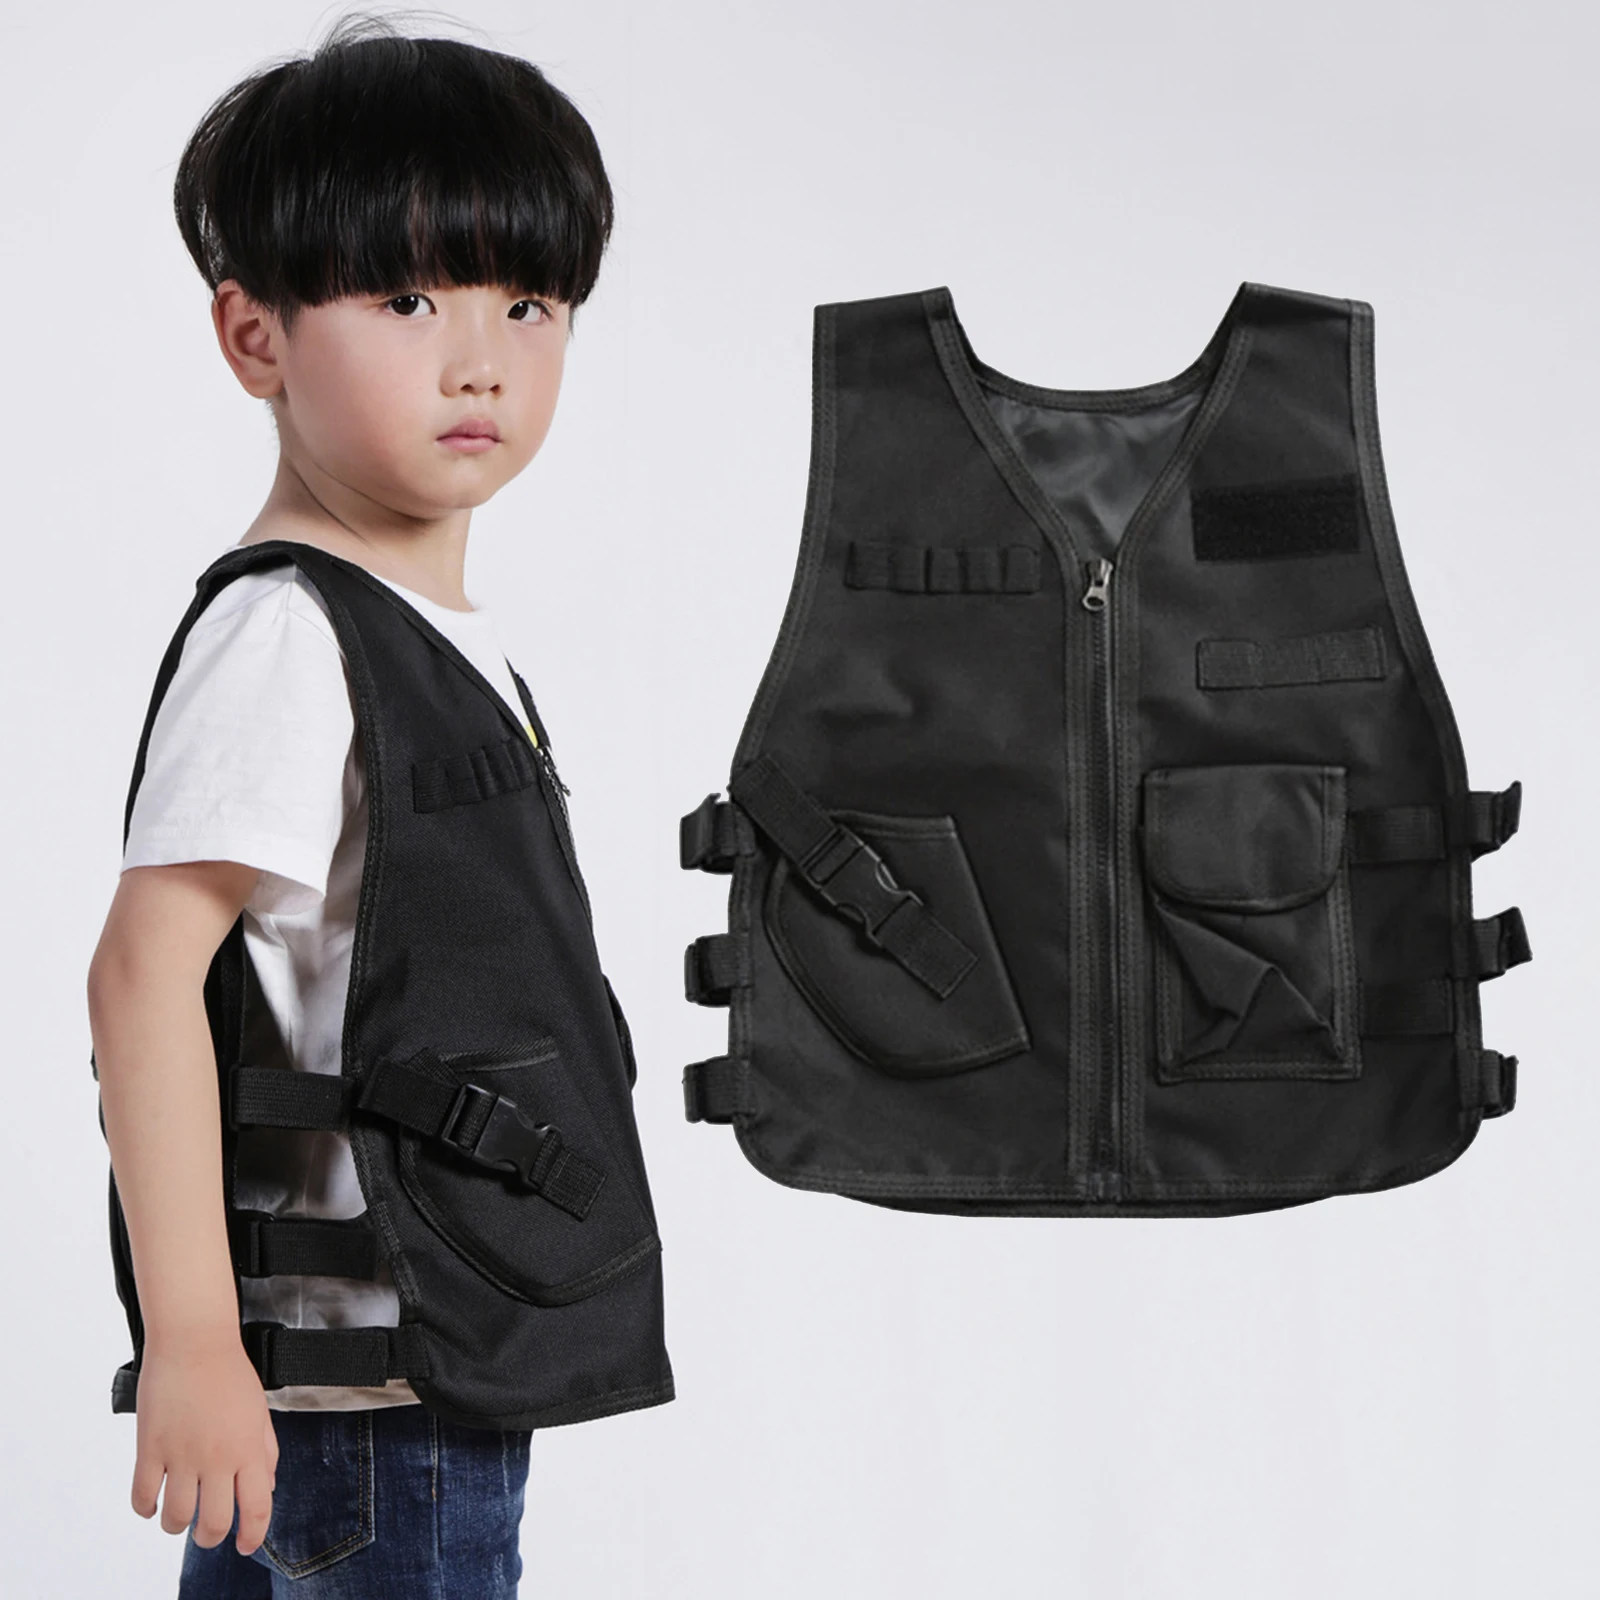 Protective Kids Children  Outdoor Training Gilet Equipment Safety Gear for Hunting, CS Gaming, Teens Shooting